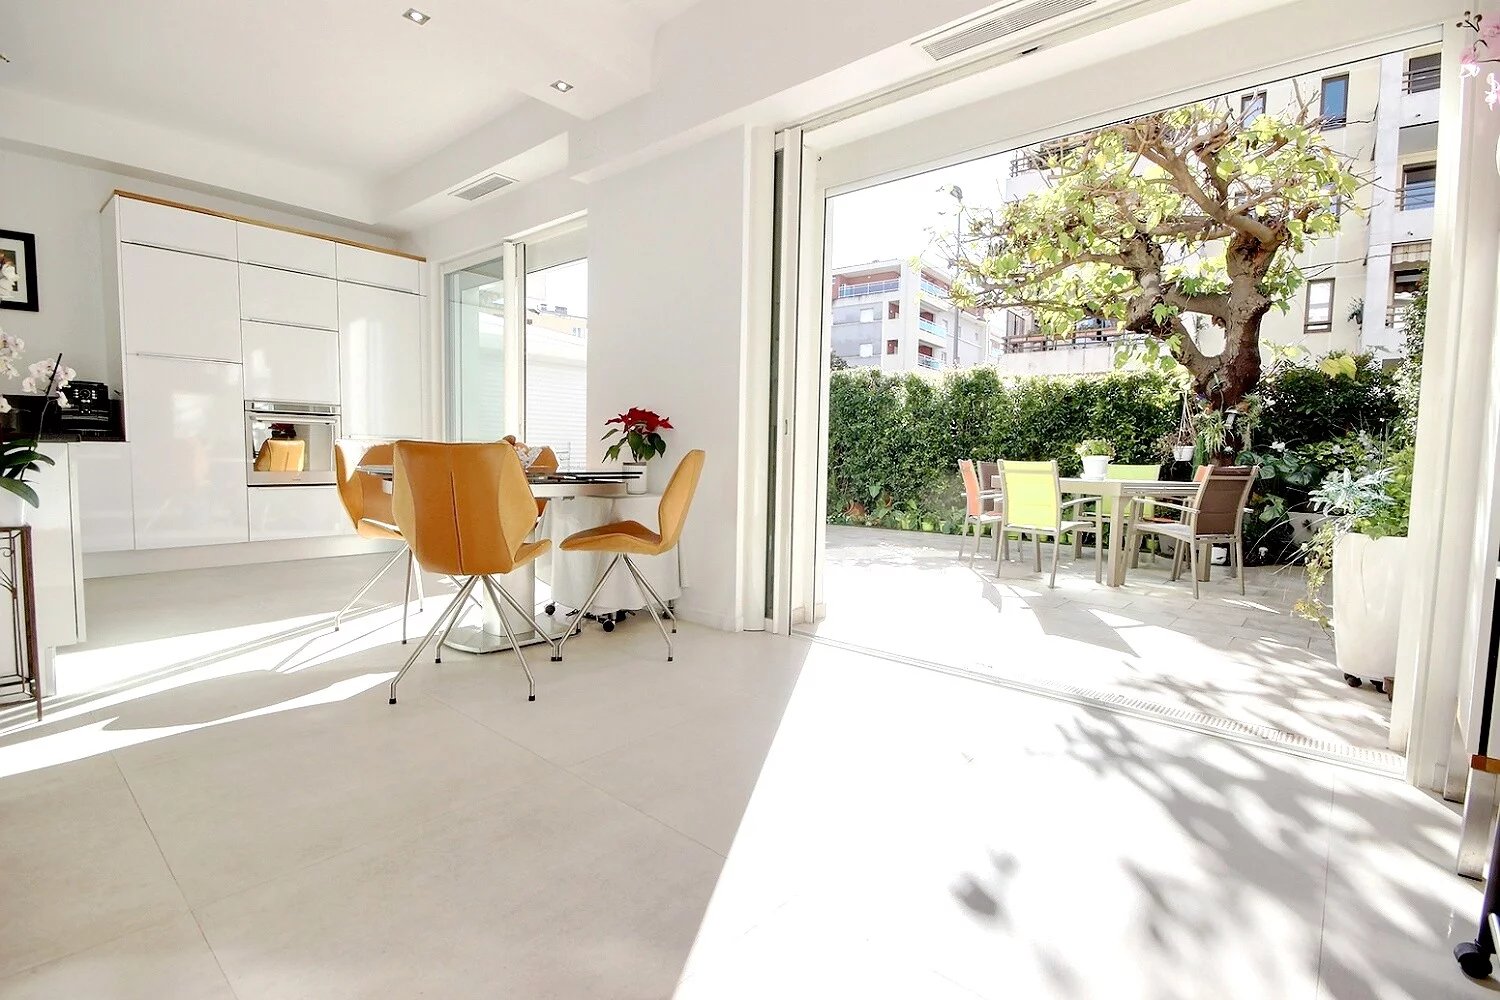 Charming Apartment for Sale in Cannes - Palm-Beach Area, Near Port Canto and Croisette